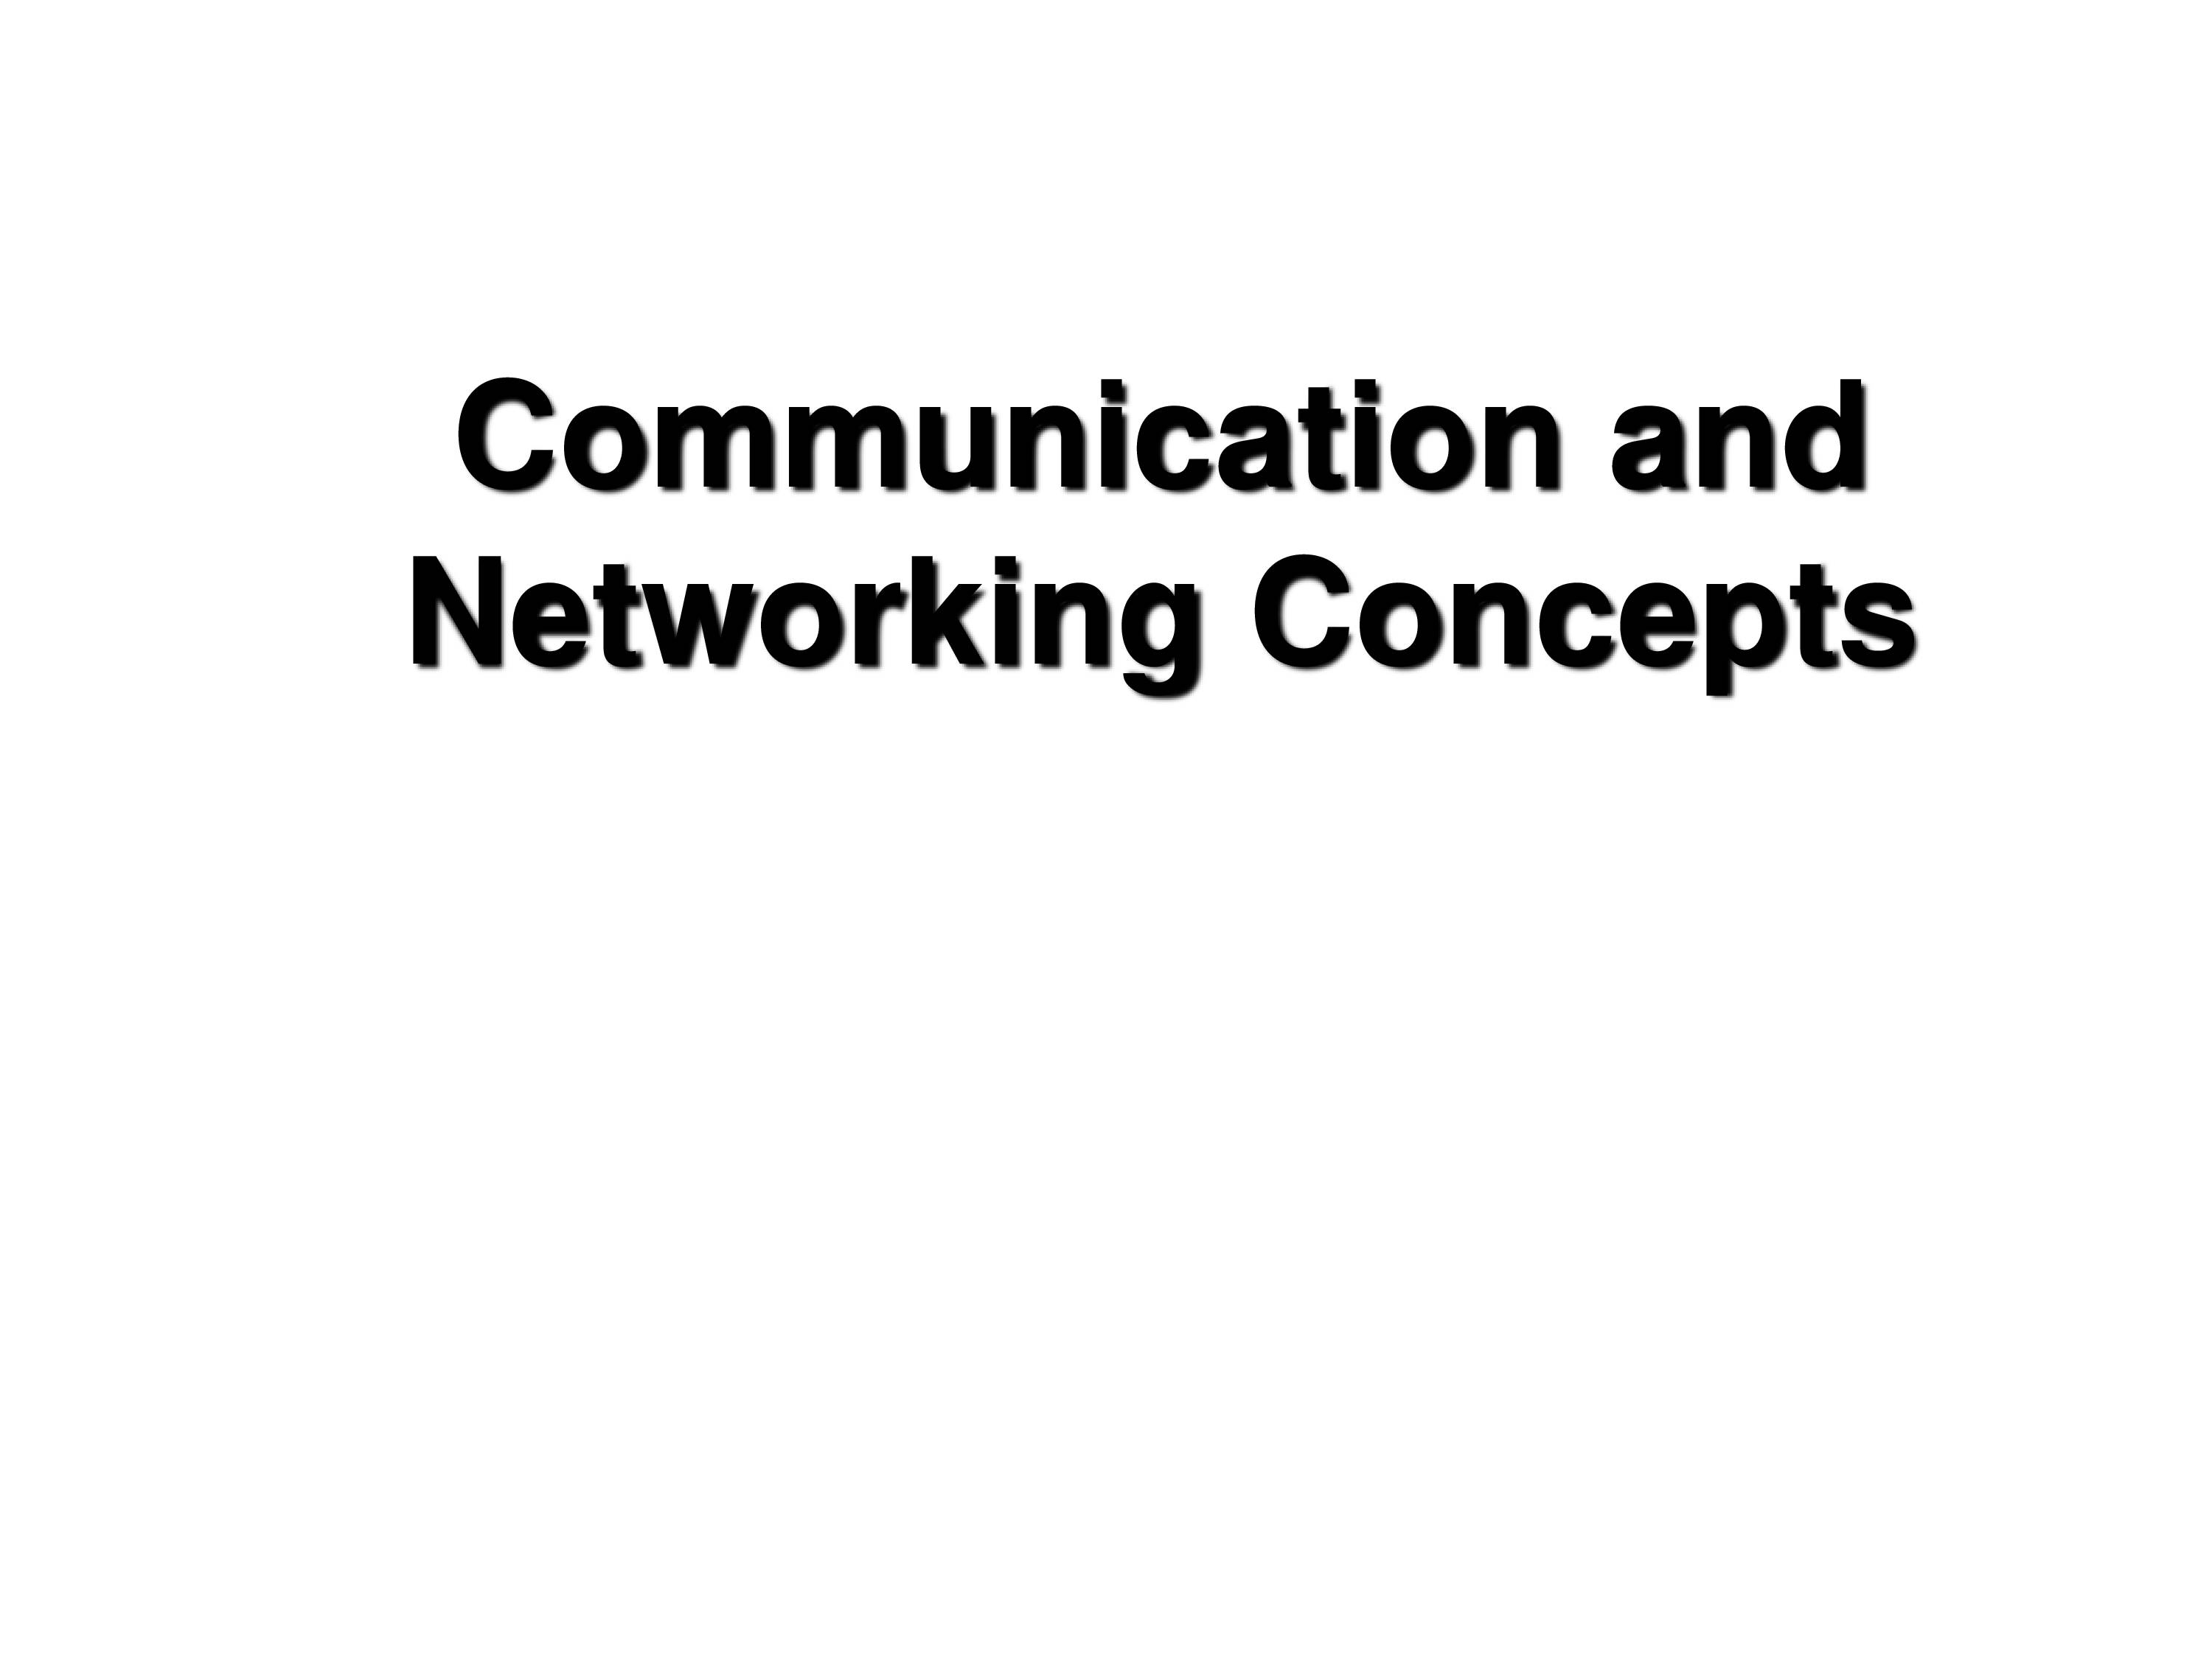 PPT on Networking